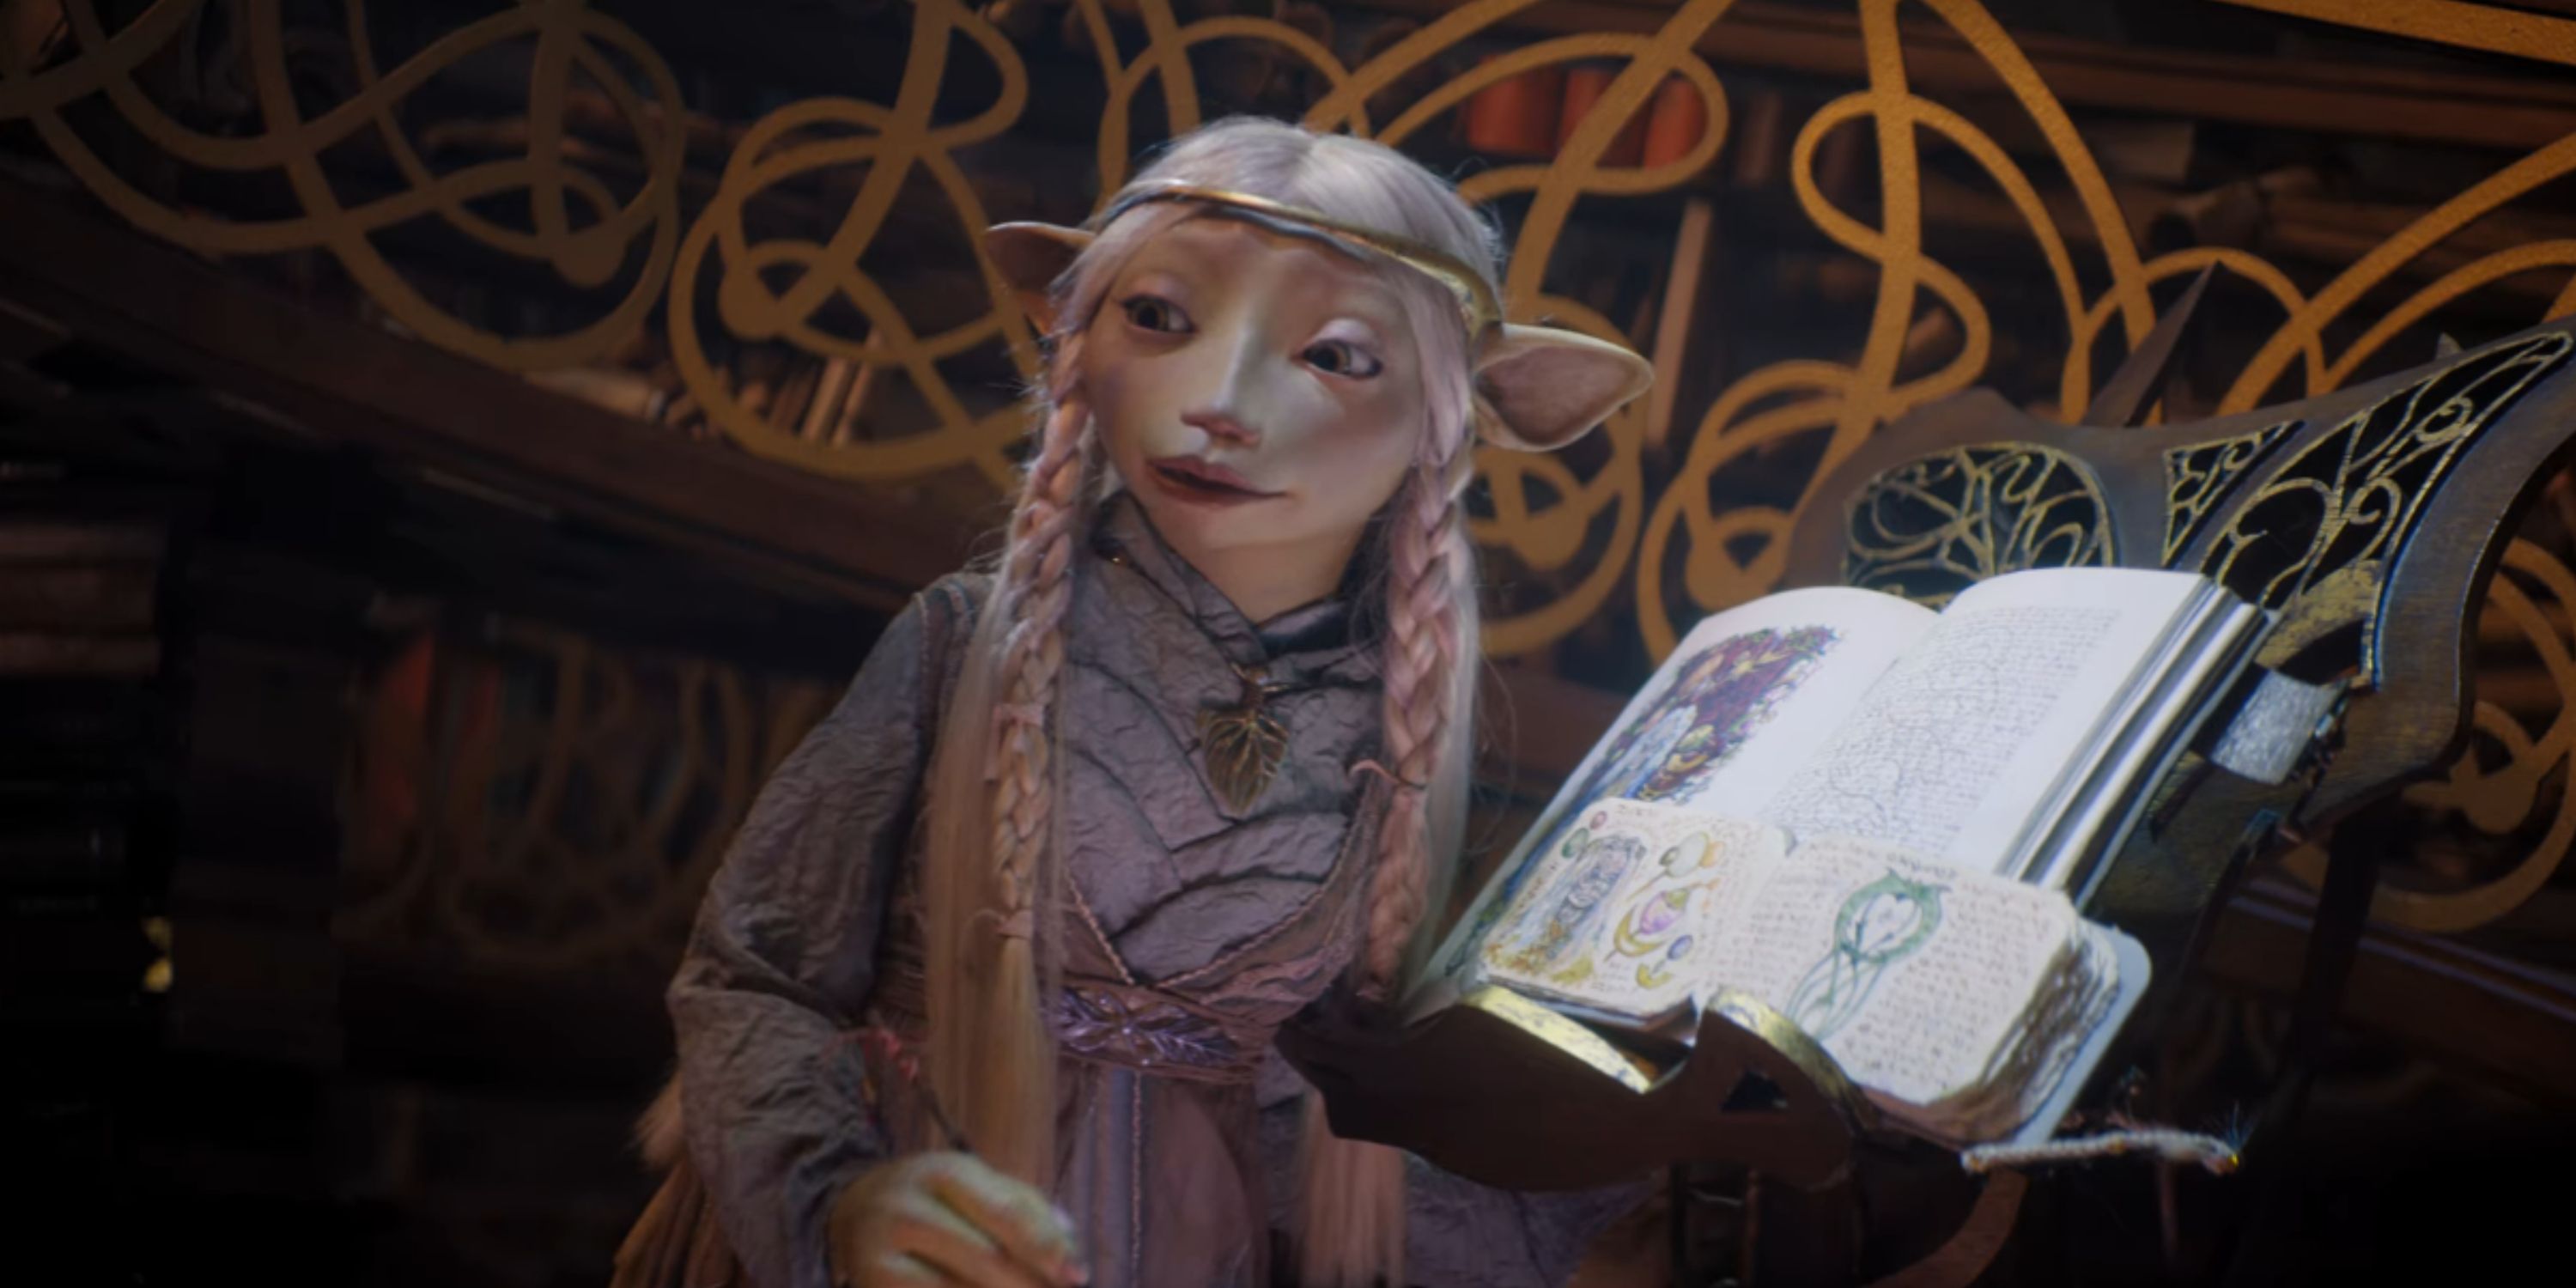 Brea, an elf-like princess from The Dark Crystal: Age of Resistance